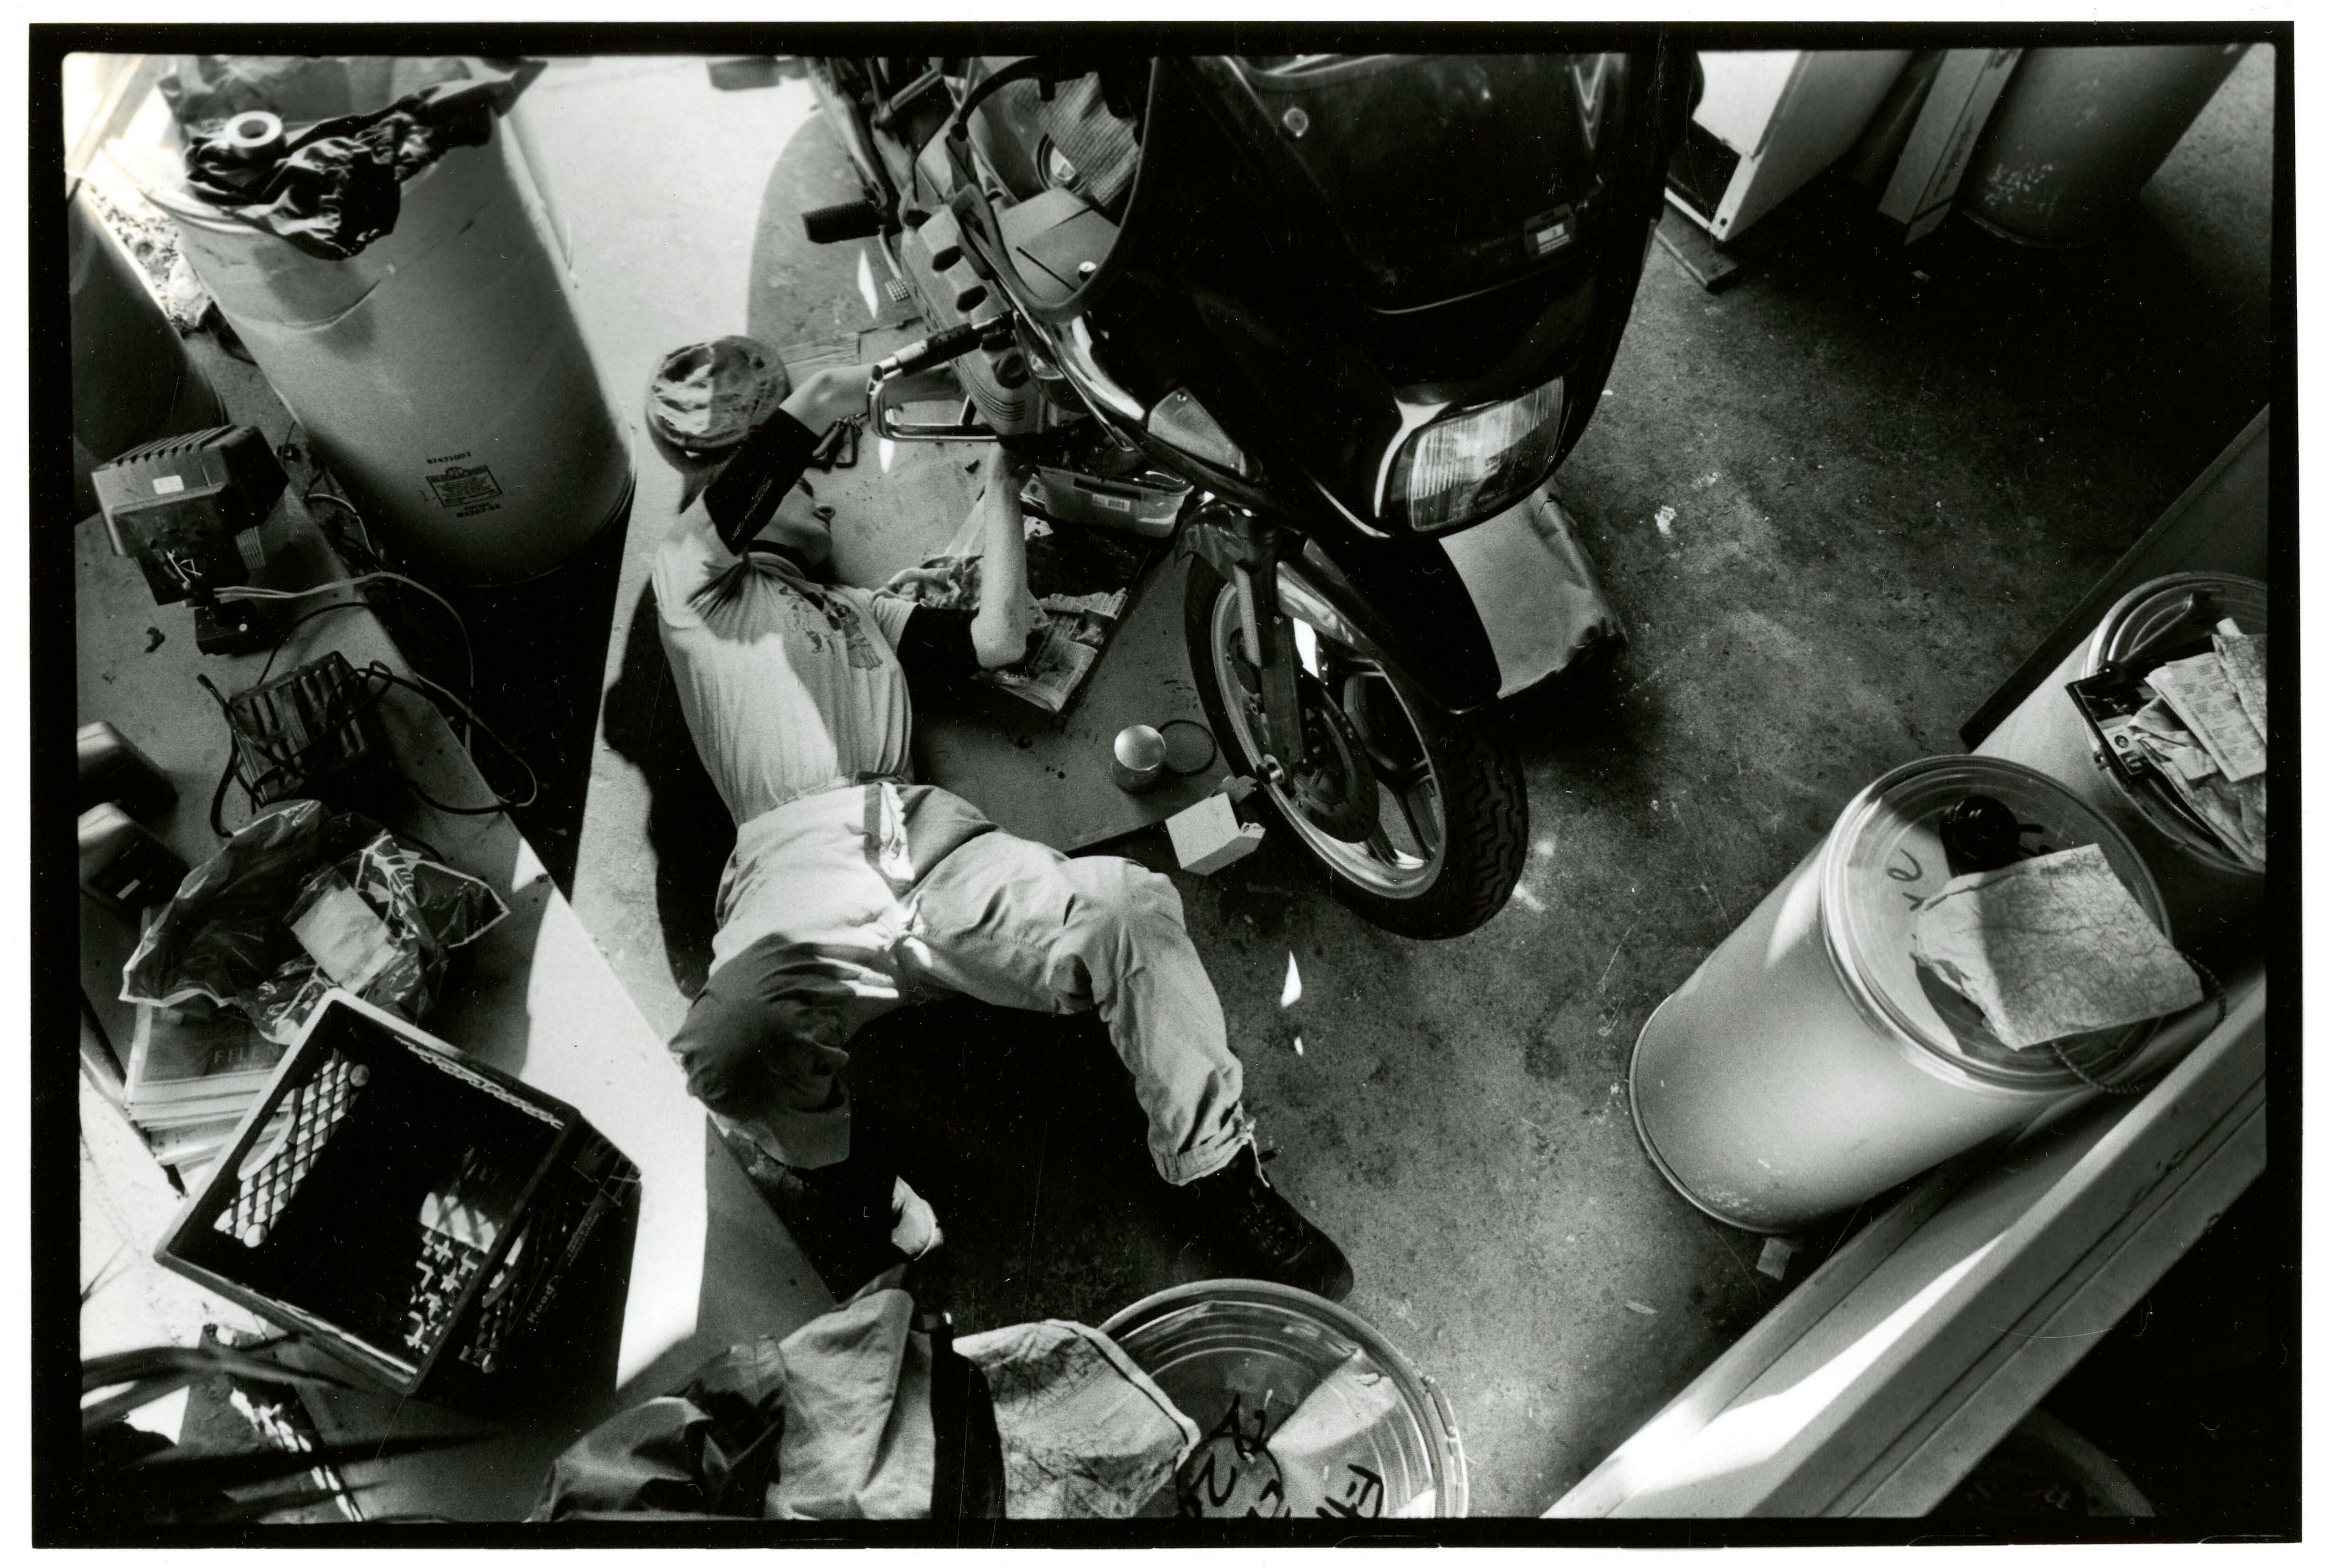 Black and white photograph of a mechanic laying on a garage floor to work on a motorcycle.